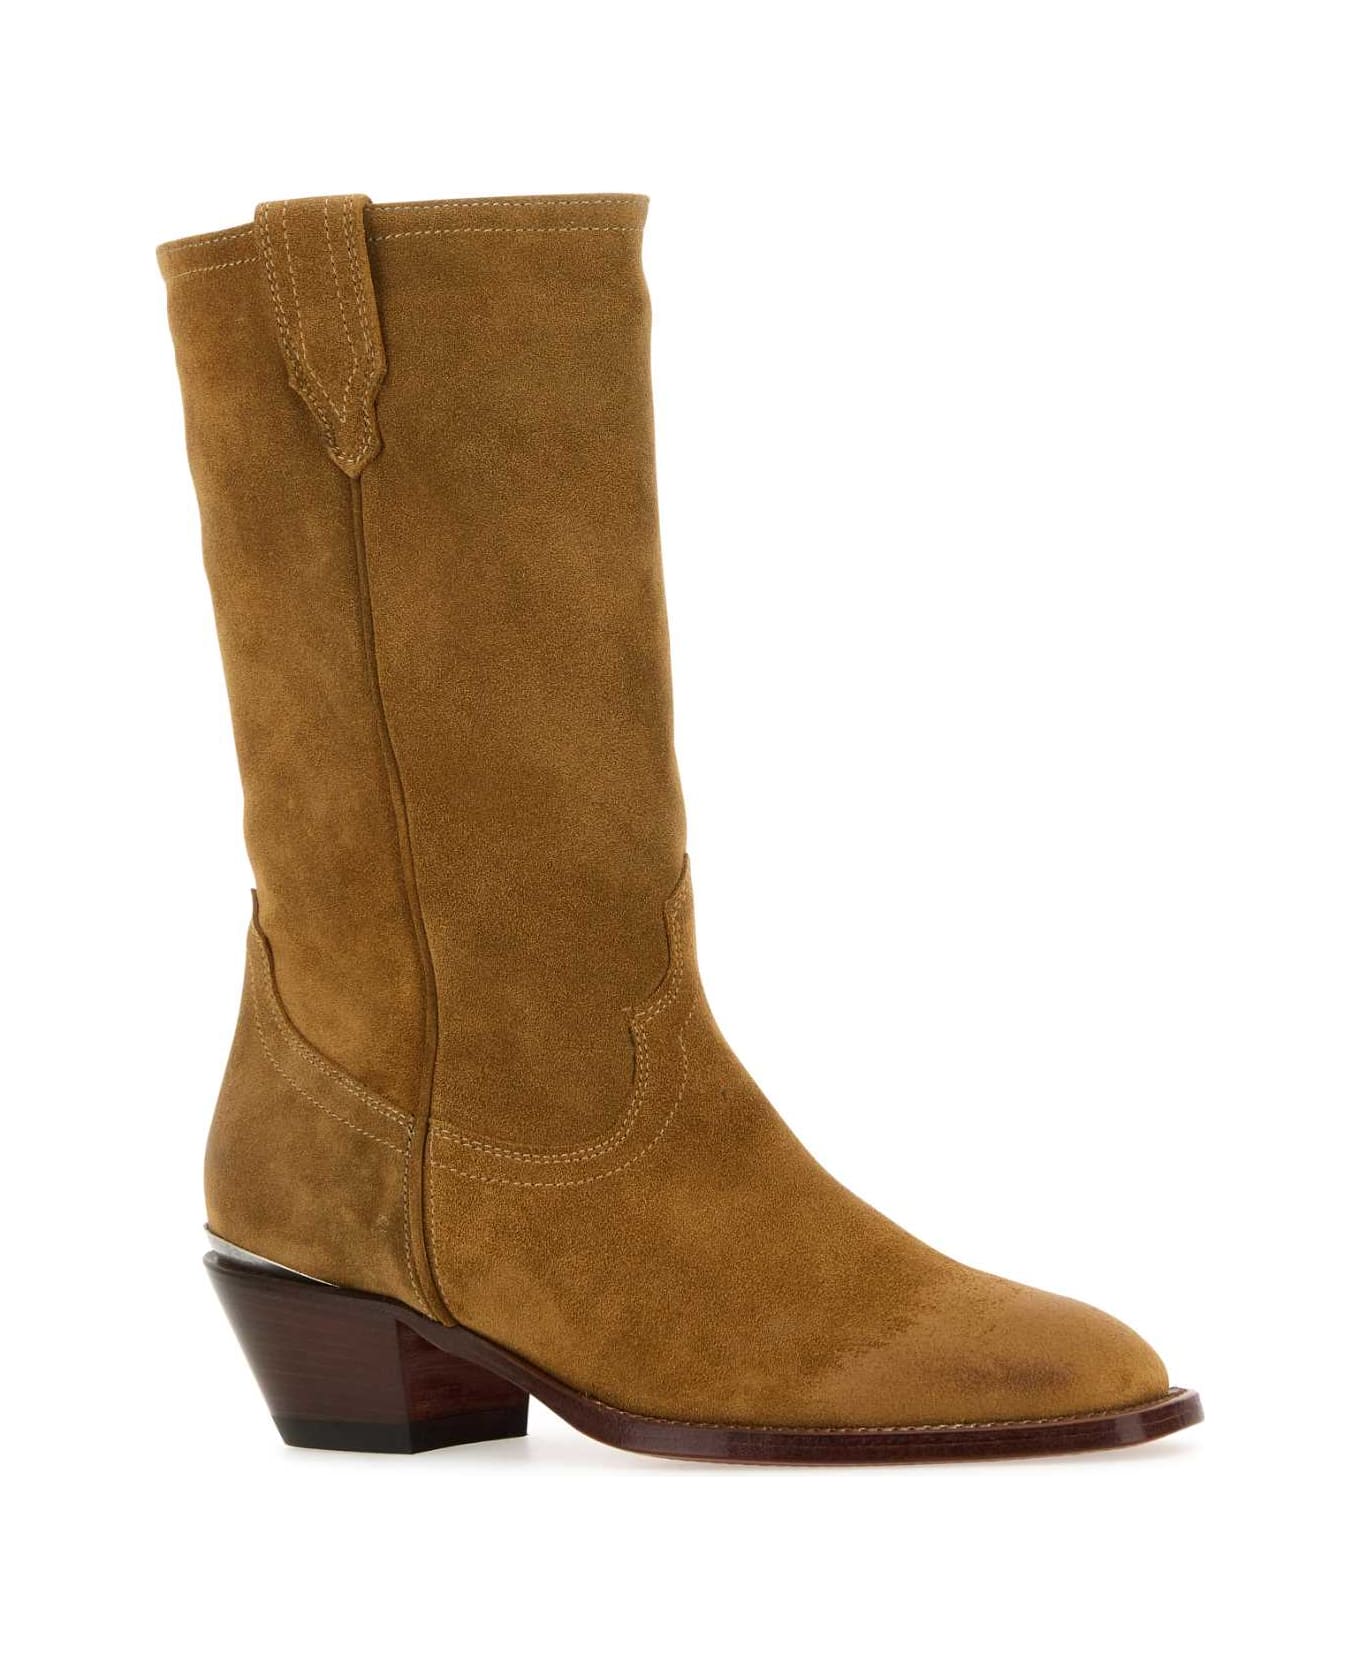 Sonora Camel Suede Durango Ankle Boots - CAMEL ブーツ